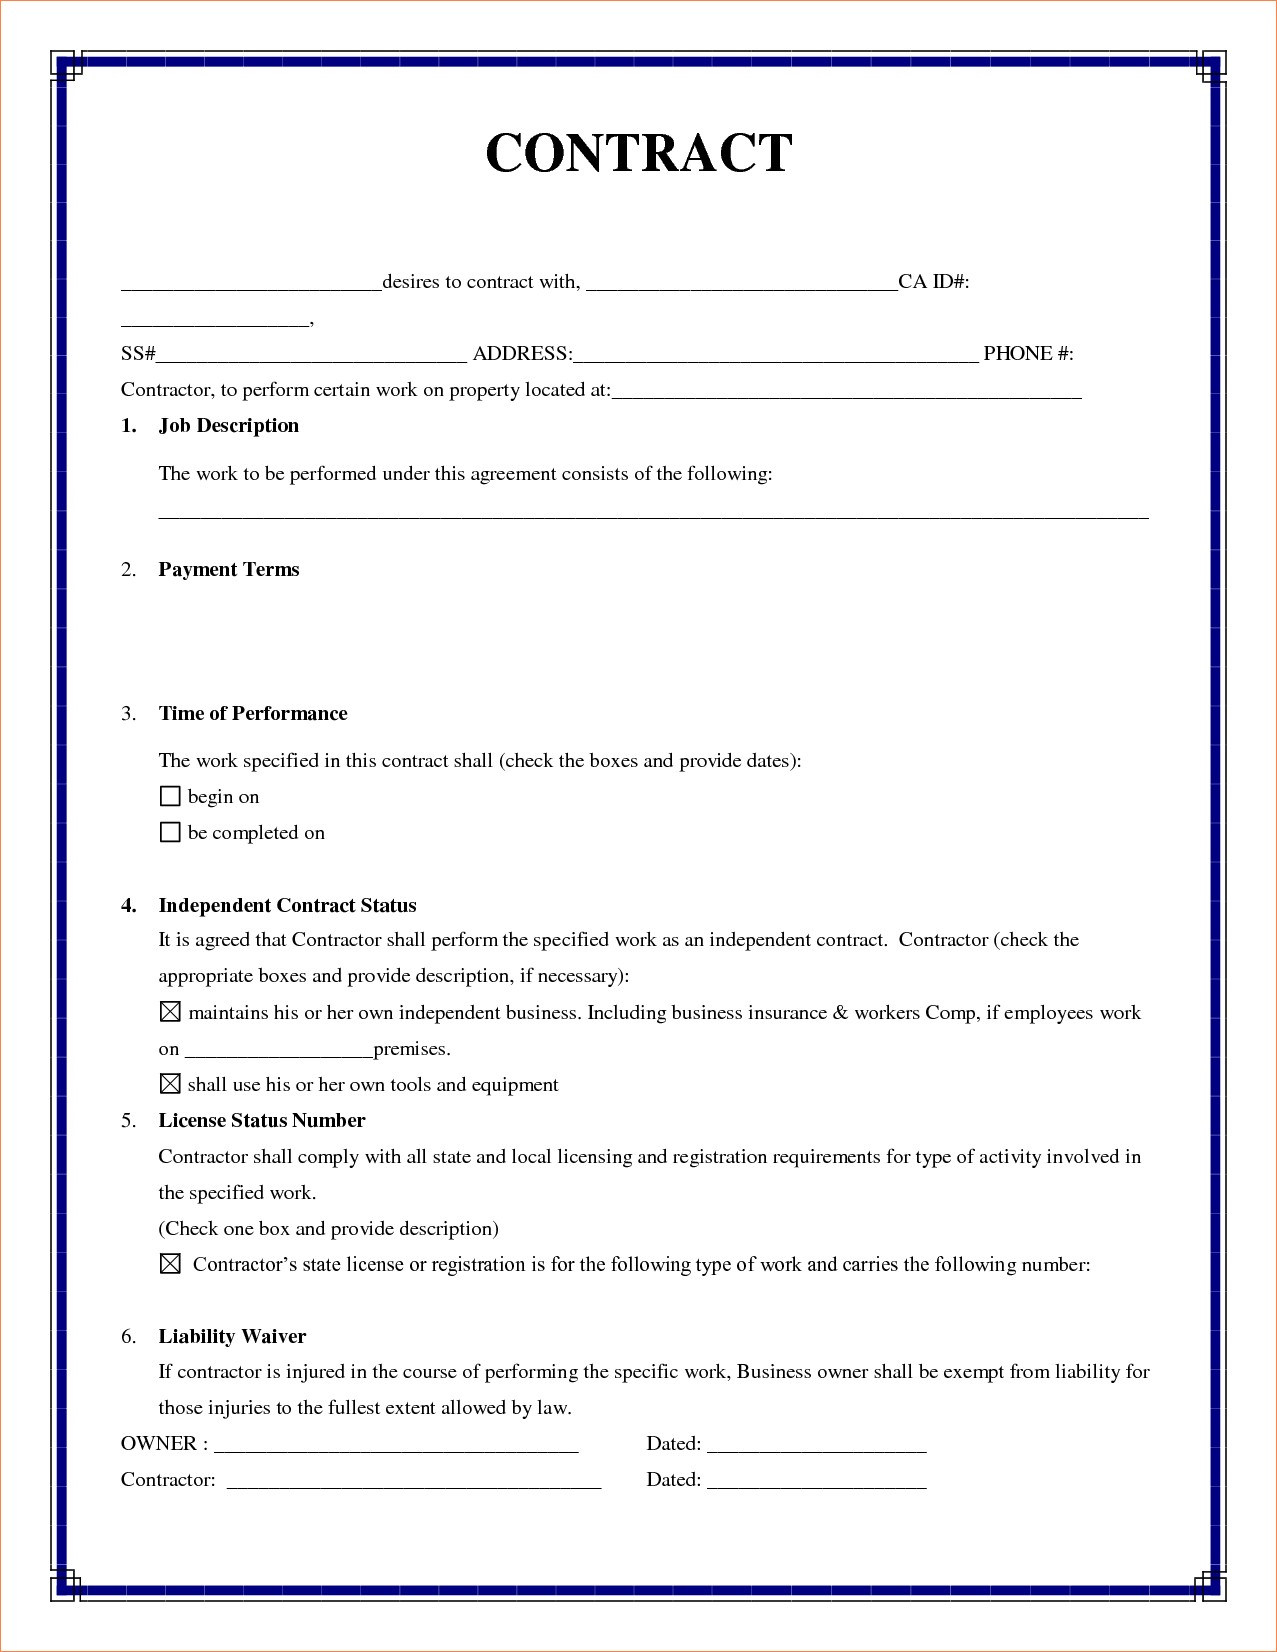 get-a-simple-contract-template-for-your-business